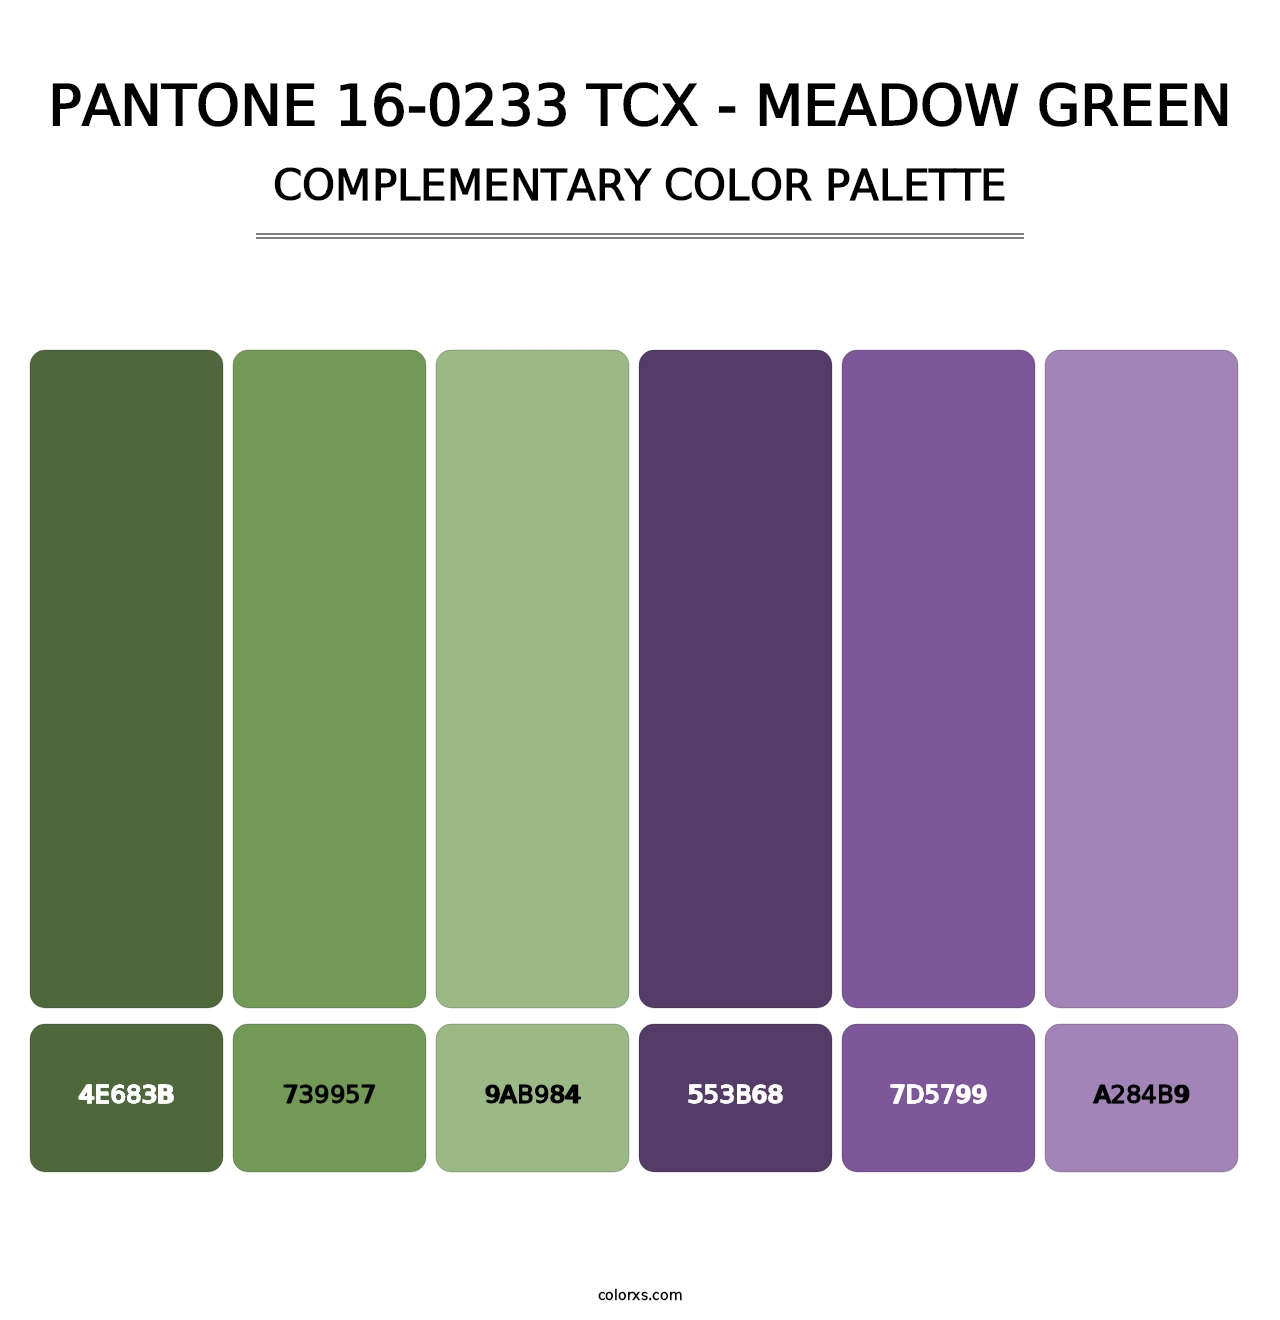 PANTONE 16-0233 TCX - Meadow Green - Complementary Color Palette